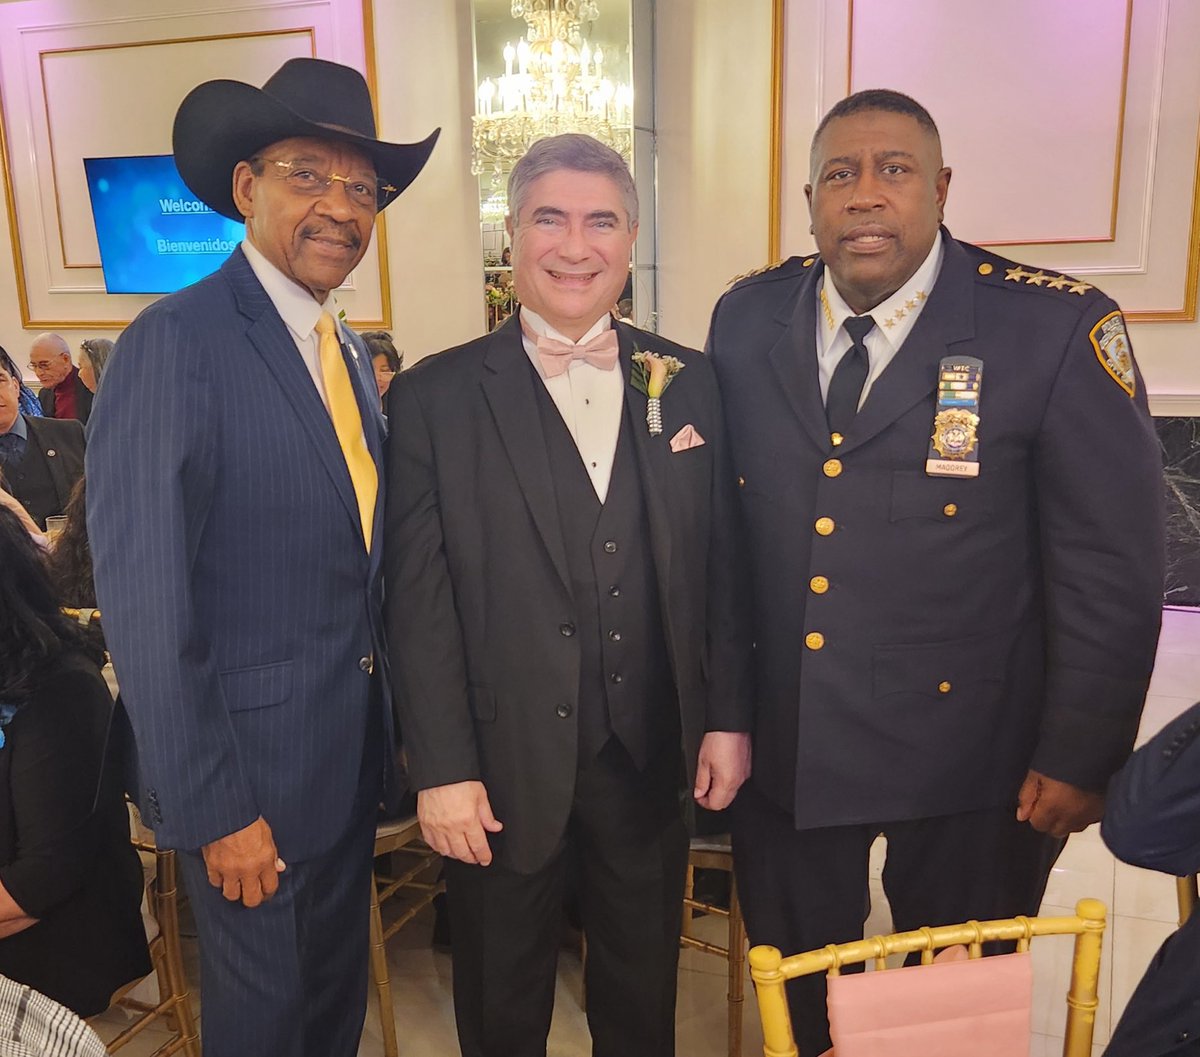 It was great to join ⁦@NYPDChiefOfDept⁩ and Hispanic Ministers in honoring Rev. Abner Rivera at Maestro’s Caterers in the Bronx. ⁦@NYPDPC⁩ ⁦@NYPDChiefPatrol⁩ ⁦@NYPDChief⁩ ⁦@NYCMayor⁩ ⁦@OswaldDenis5⁩ ⁦⁦@ErickSalgadoNYC⁩ ⁦